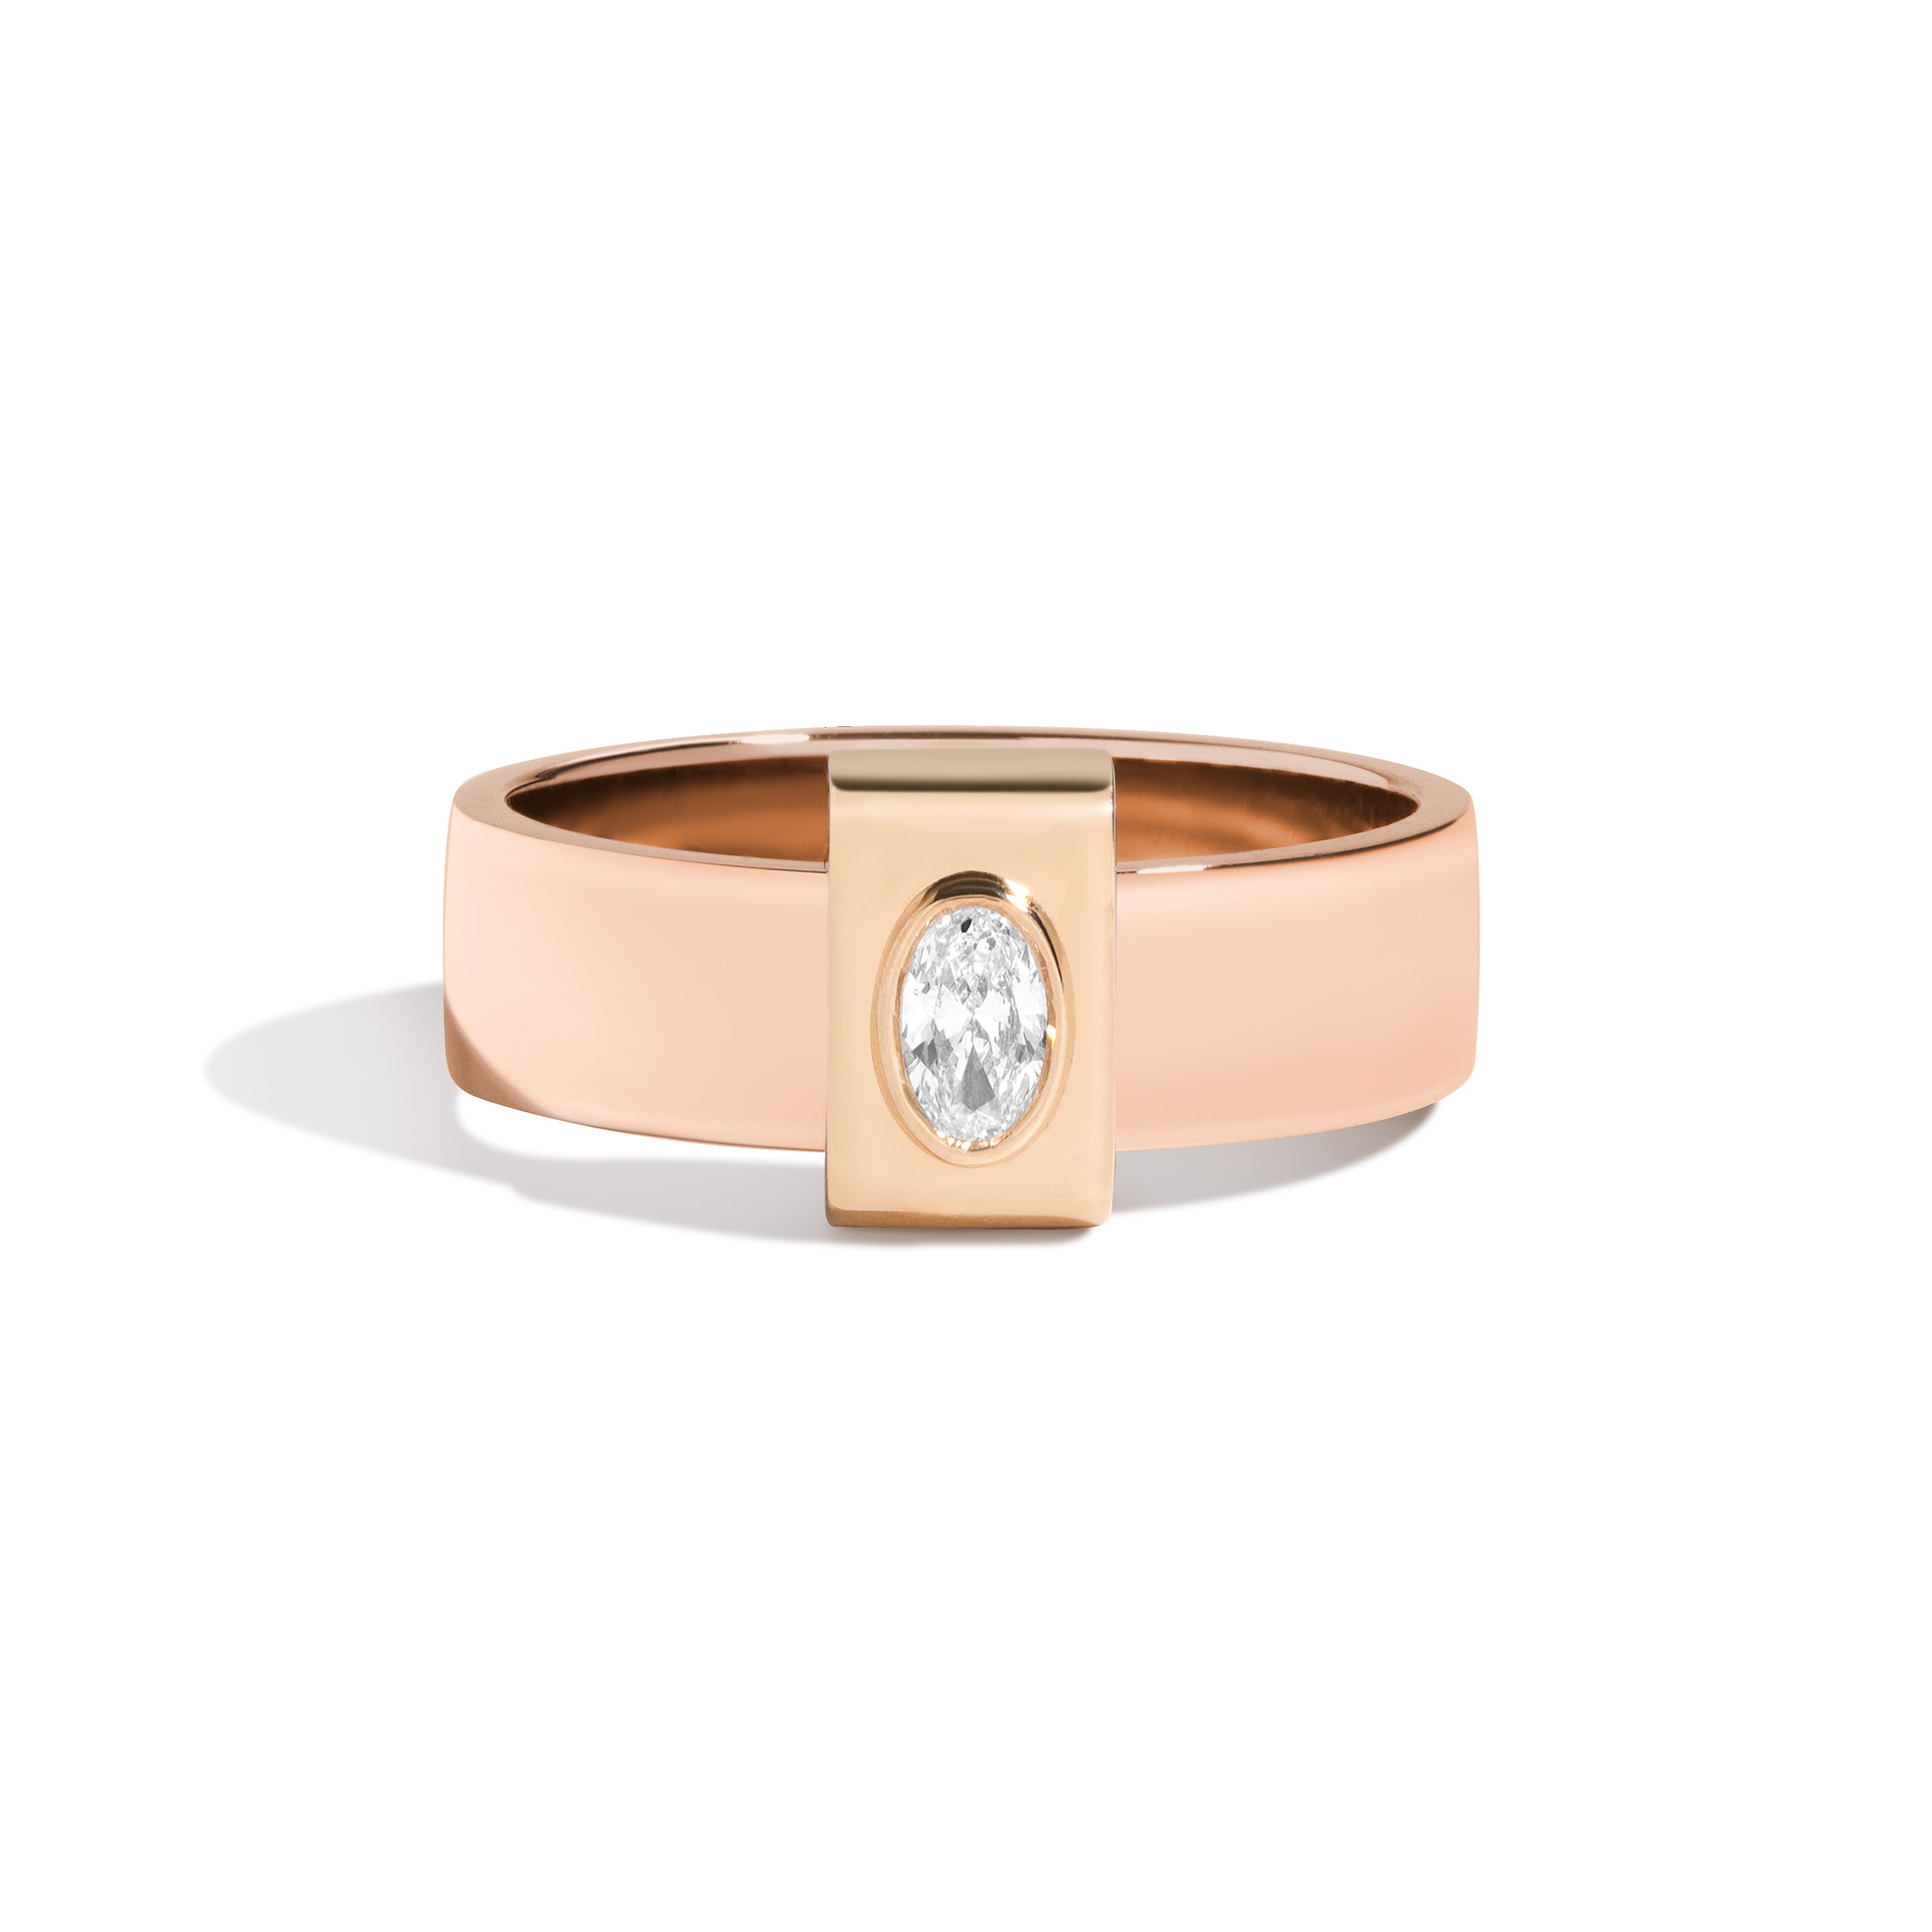 Shahla Karimi Signature 14K Rose Gold 6mm Band With Oval 14K Yellow Gold  Wrap